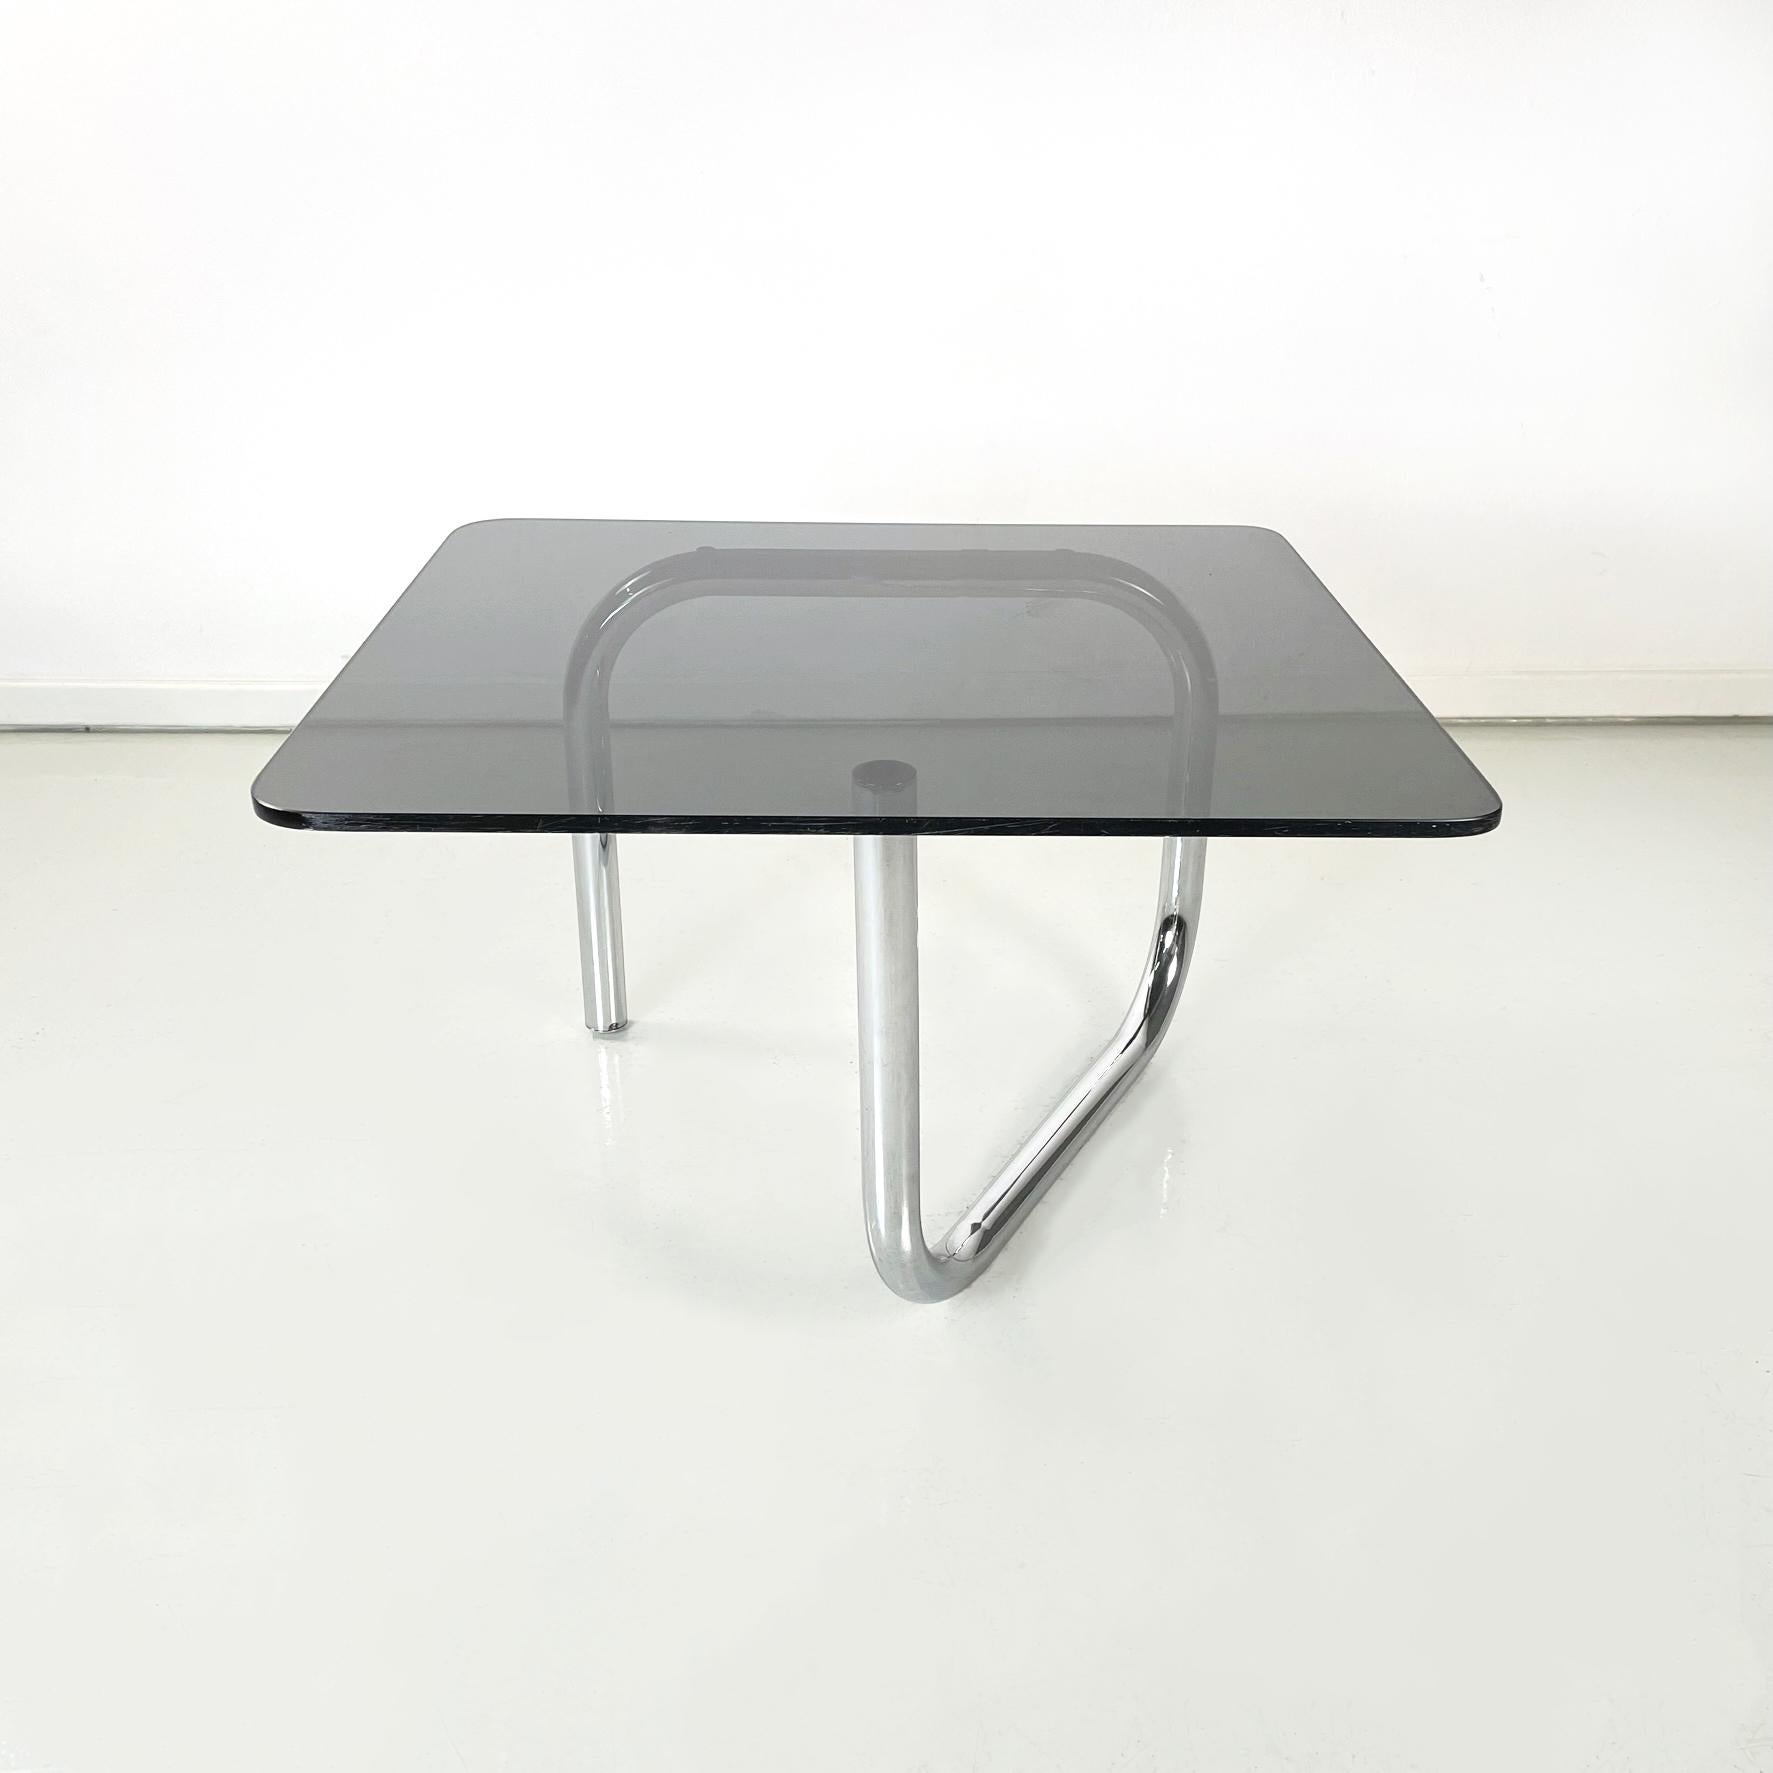 Italian modern coffee table with rectangular smoked glass and chromed steel, 1970s.
Coffee table with rectangular top and rounded corners in smoked glass. The structure is made up of a single tubular chromed steel with a sinuous shape.
This table